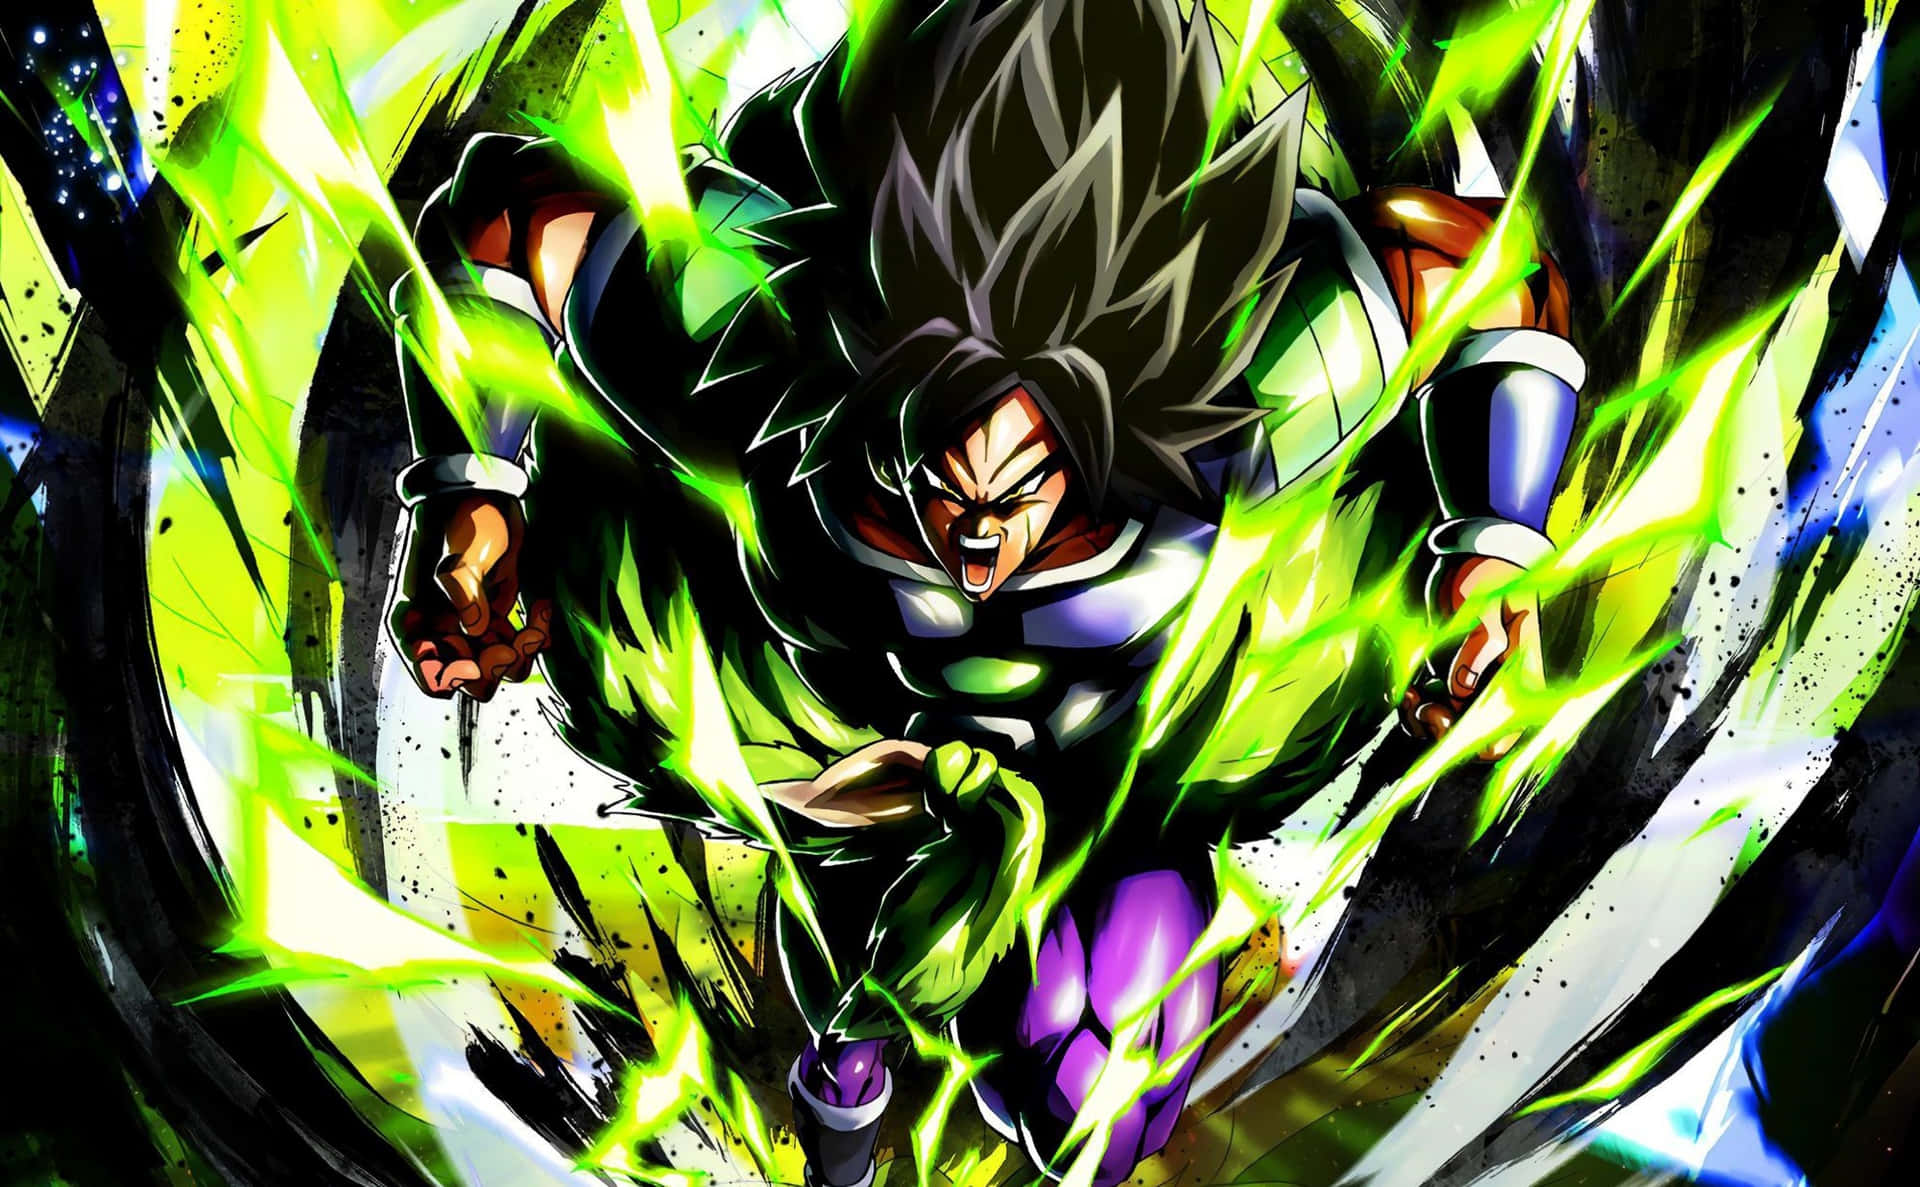 Fight for your honor and justice in Dragon Ball Super Broly